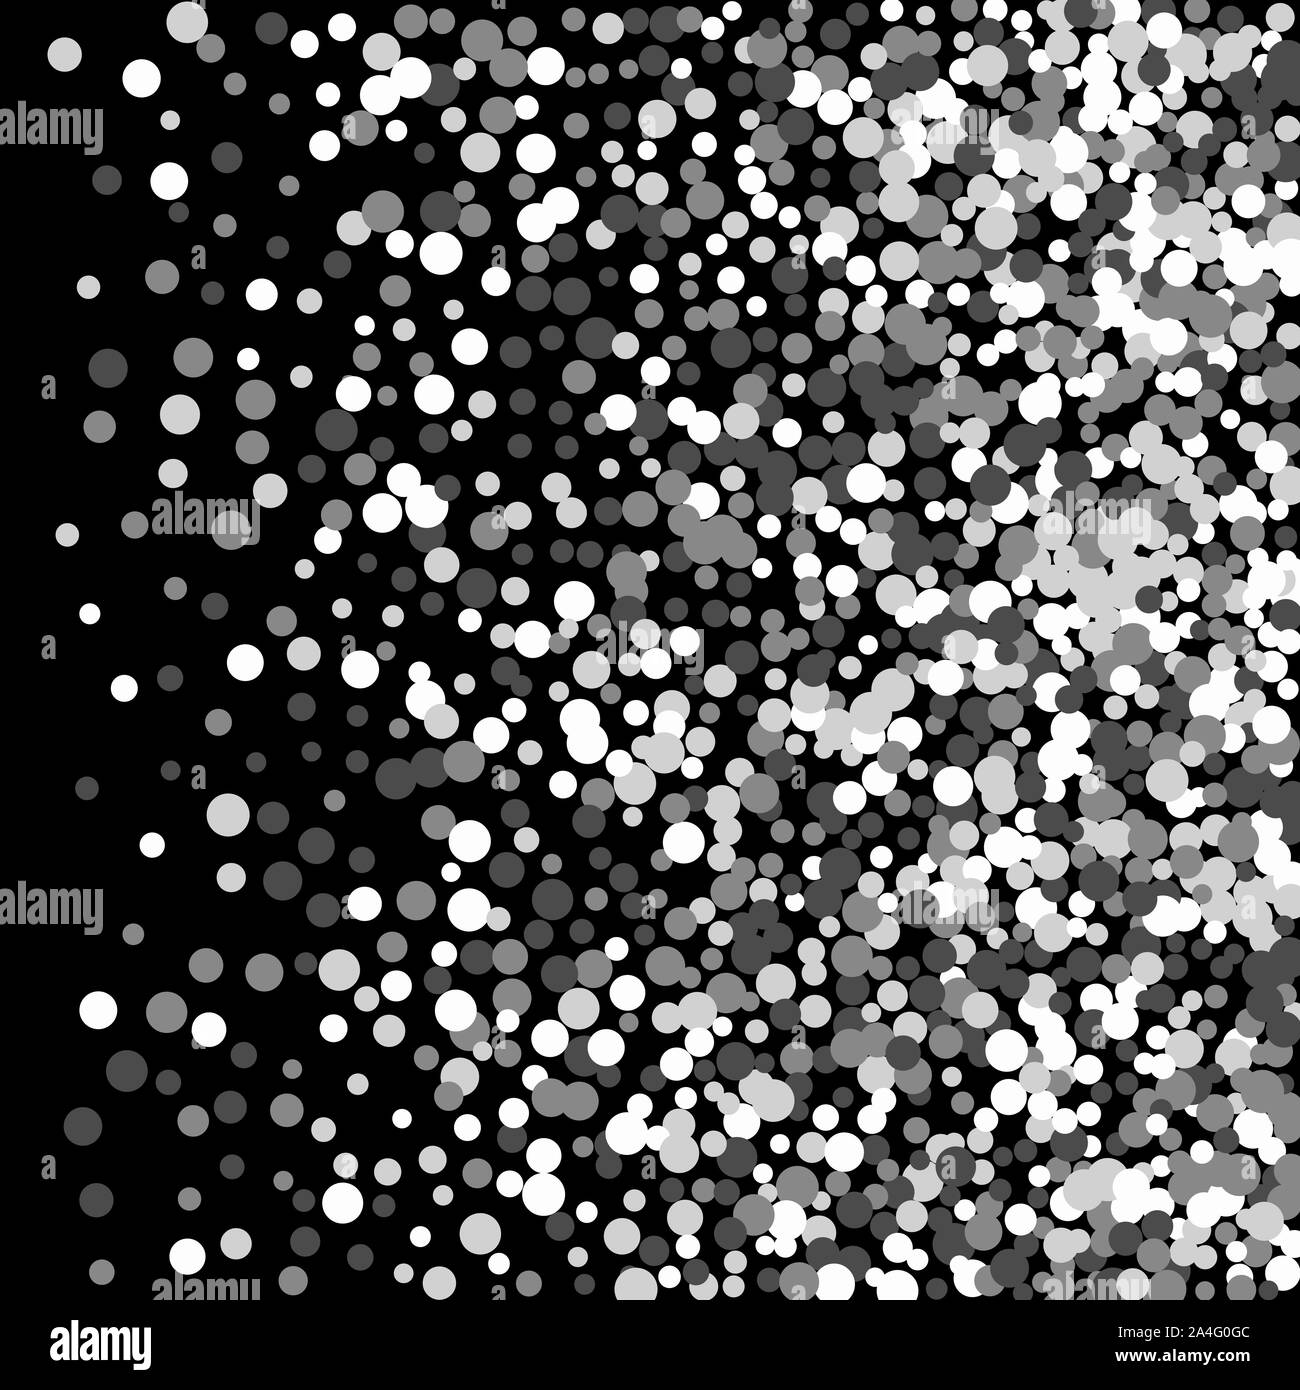 Silver glitter background Black and White Stock Photos & Images - Alamy